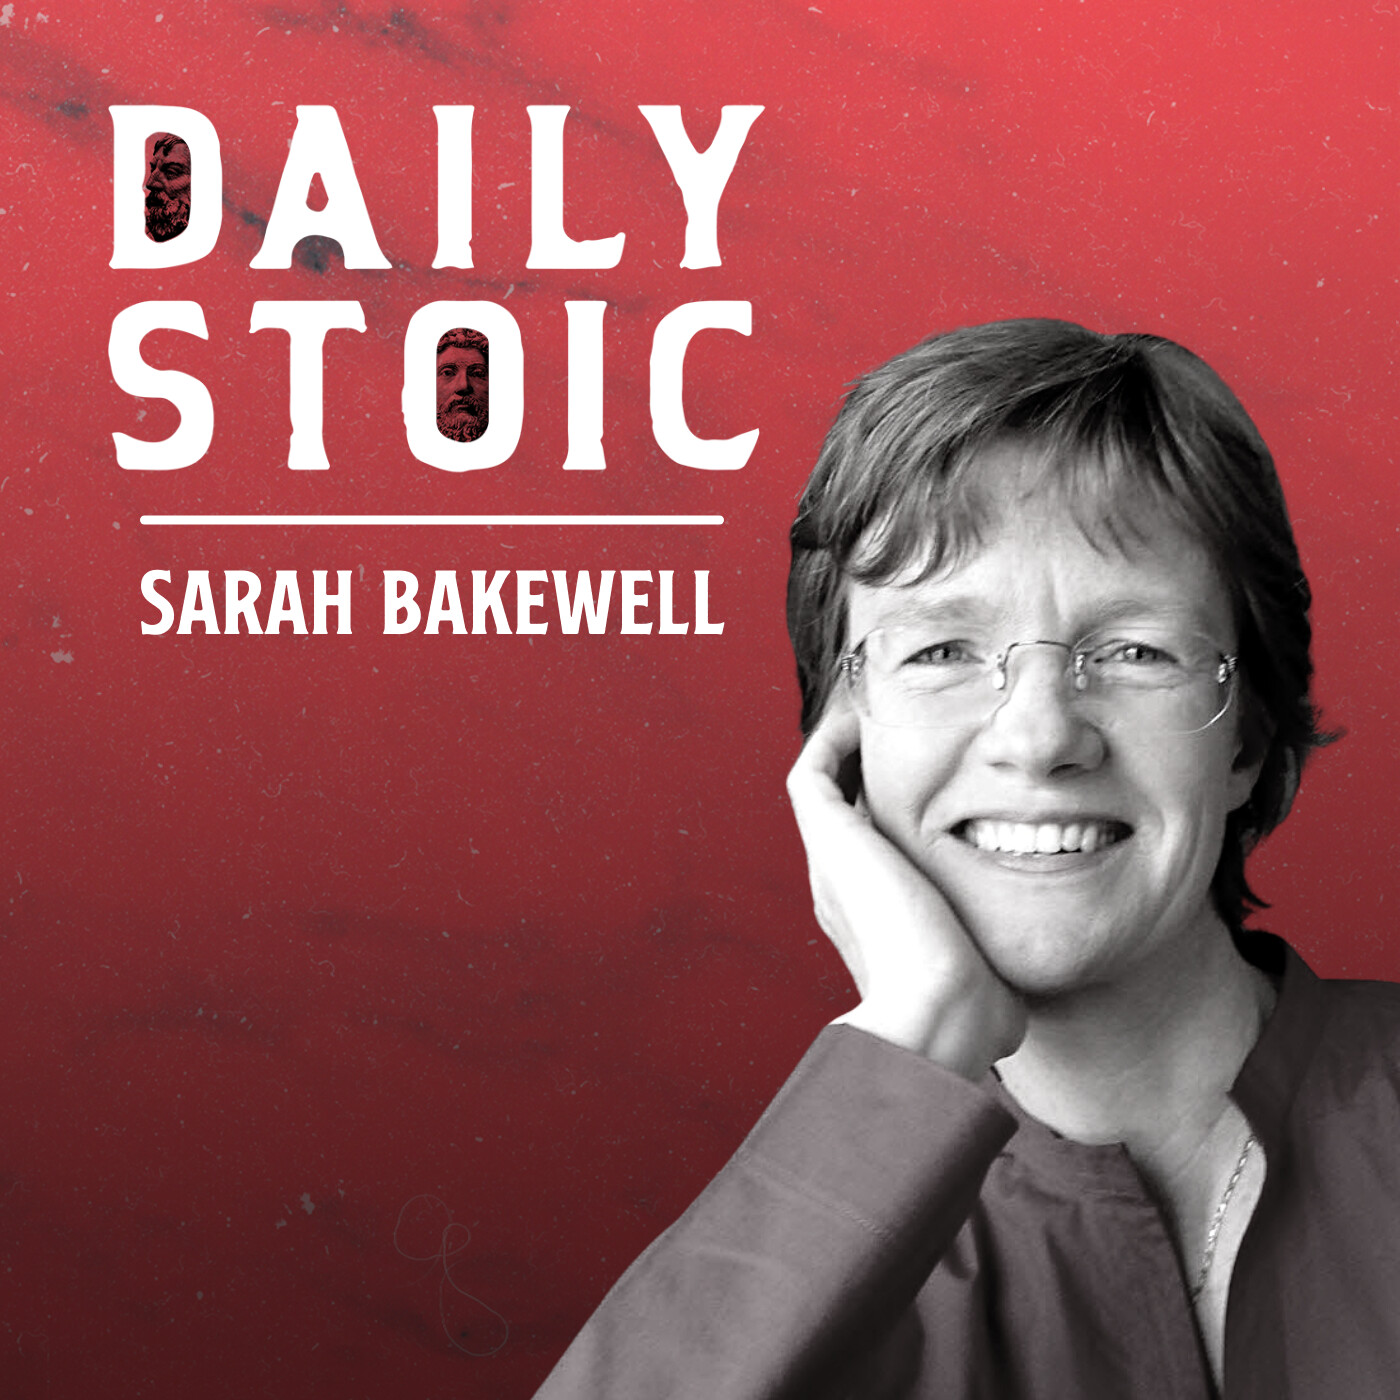 Sarah Bakewell on Humanism and The Power of Connection